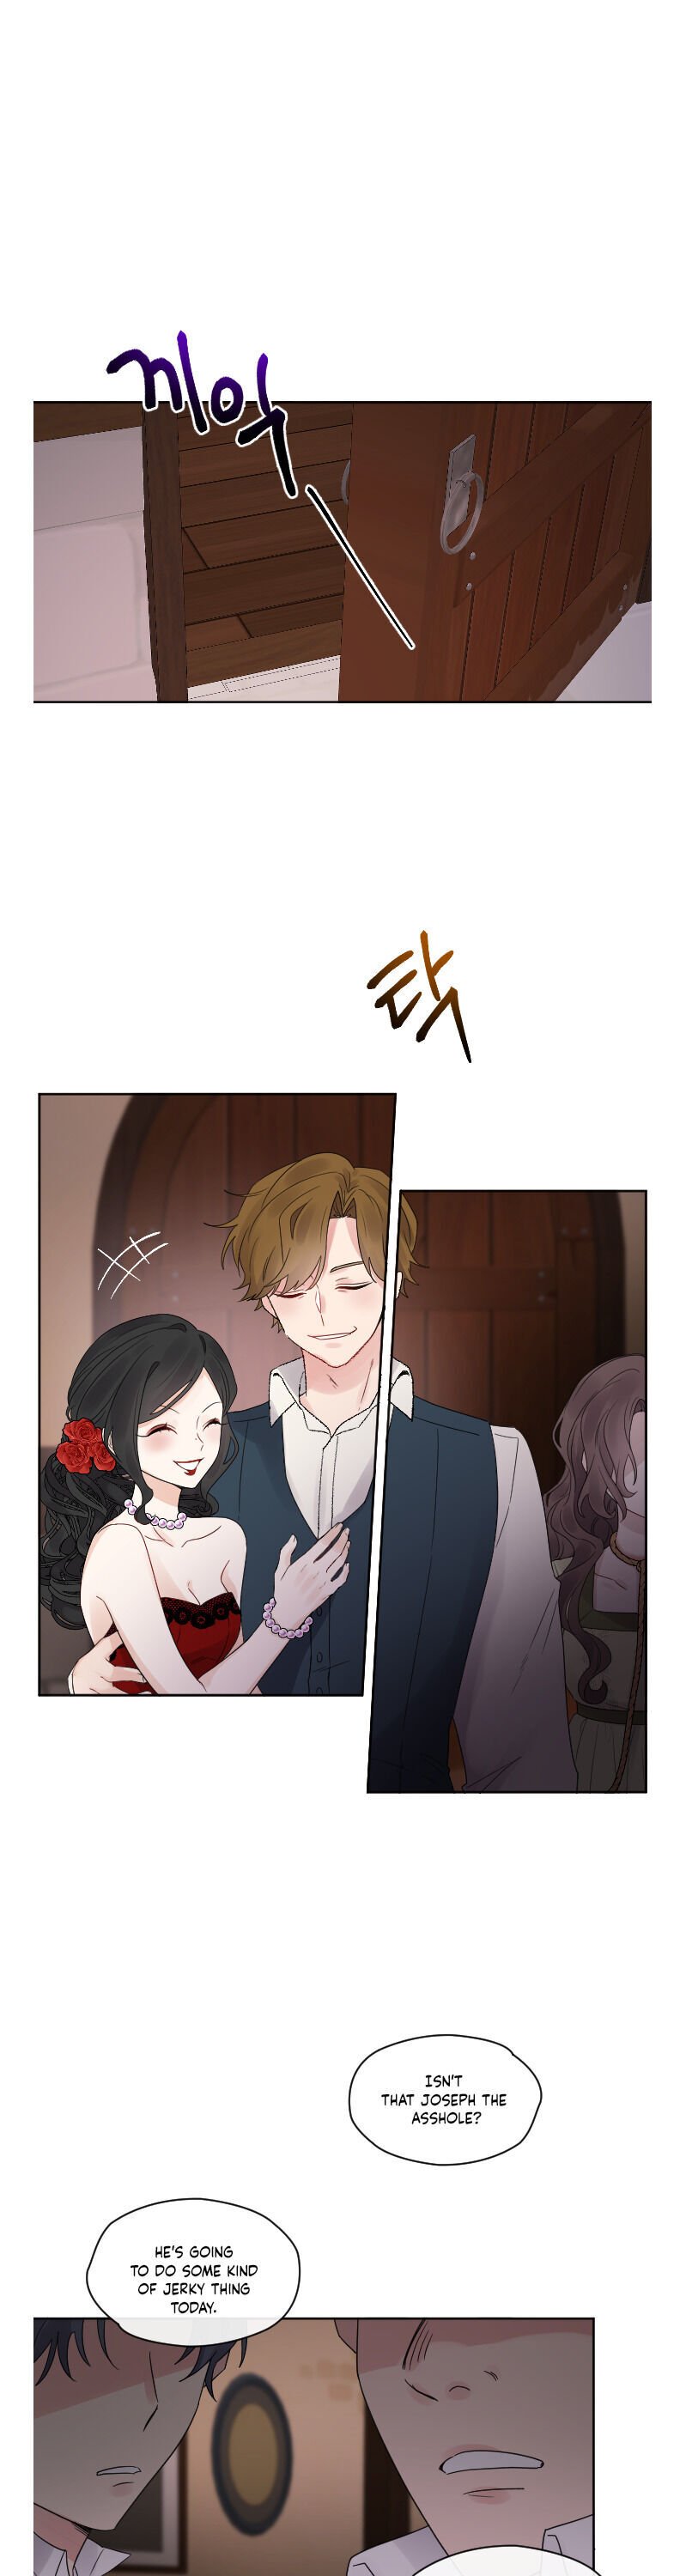 Abandoned Wife Has A New Husband chapter 1